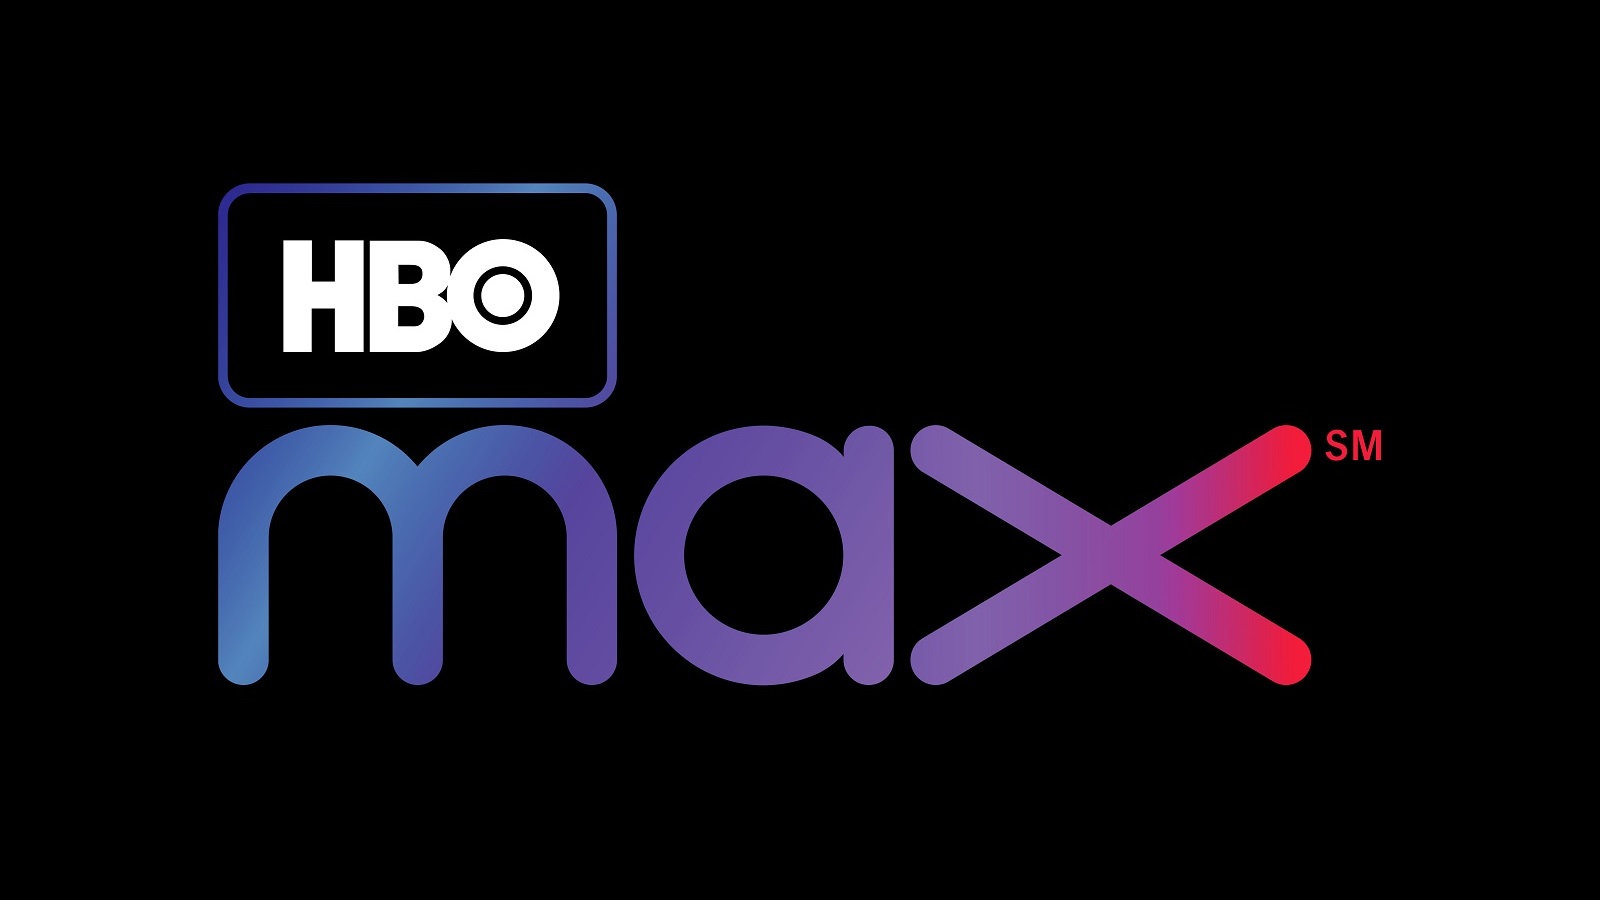 AT&T Projects They’ll Have 50 Million HBO Max Subscribers By 2025